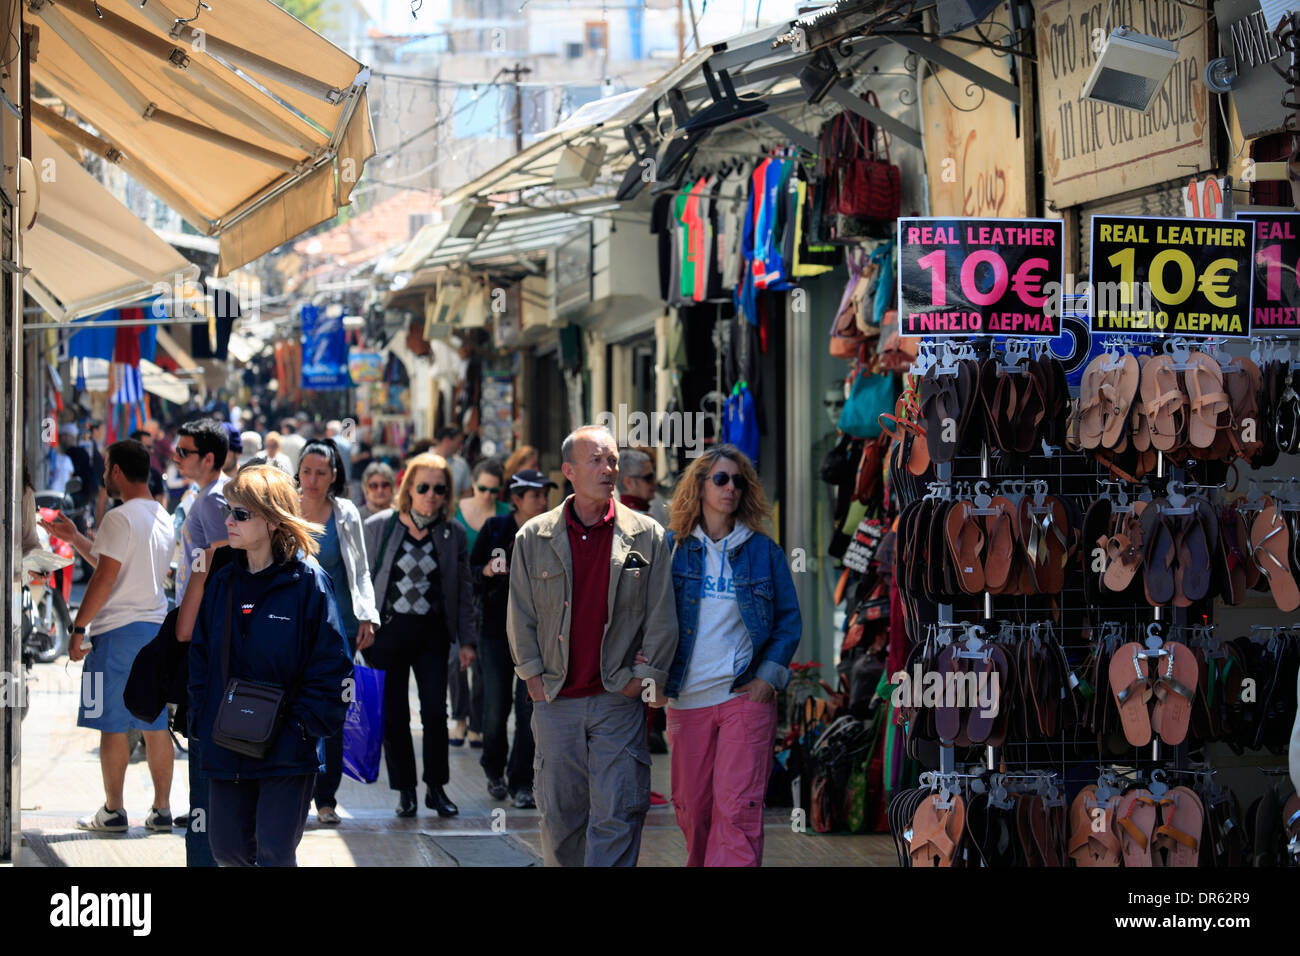 Sandal Street Shop High Resolution Stock Photography and Images - Alamy